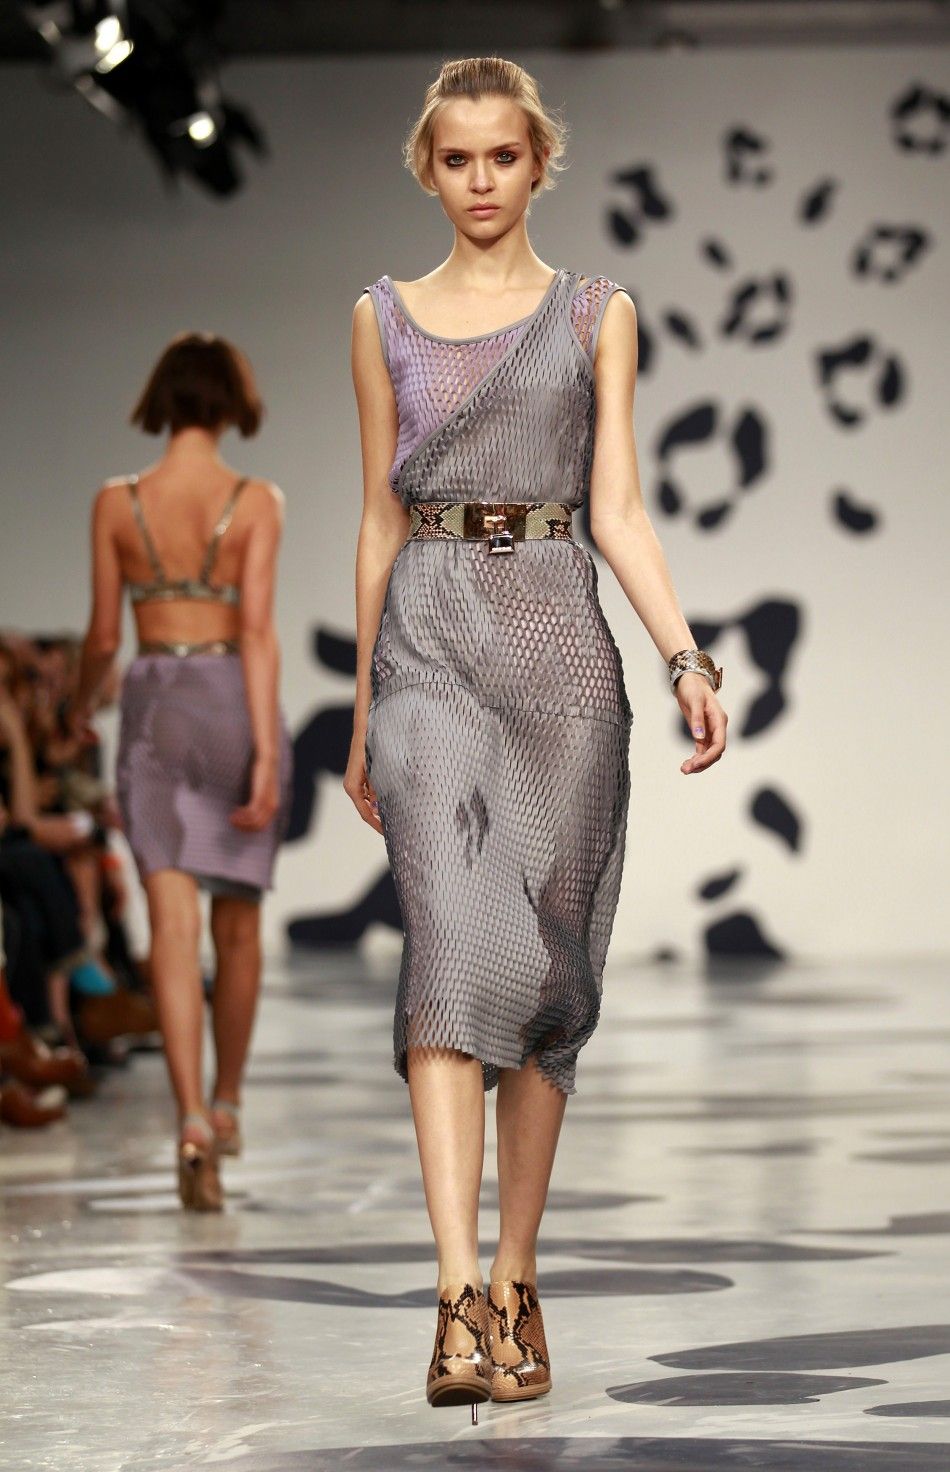 Models present creations at the House of Holland 2012 SpringSummer collection during London Fashion Week